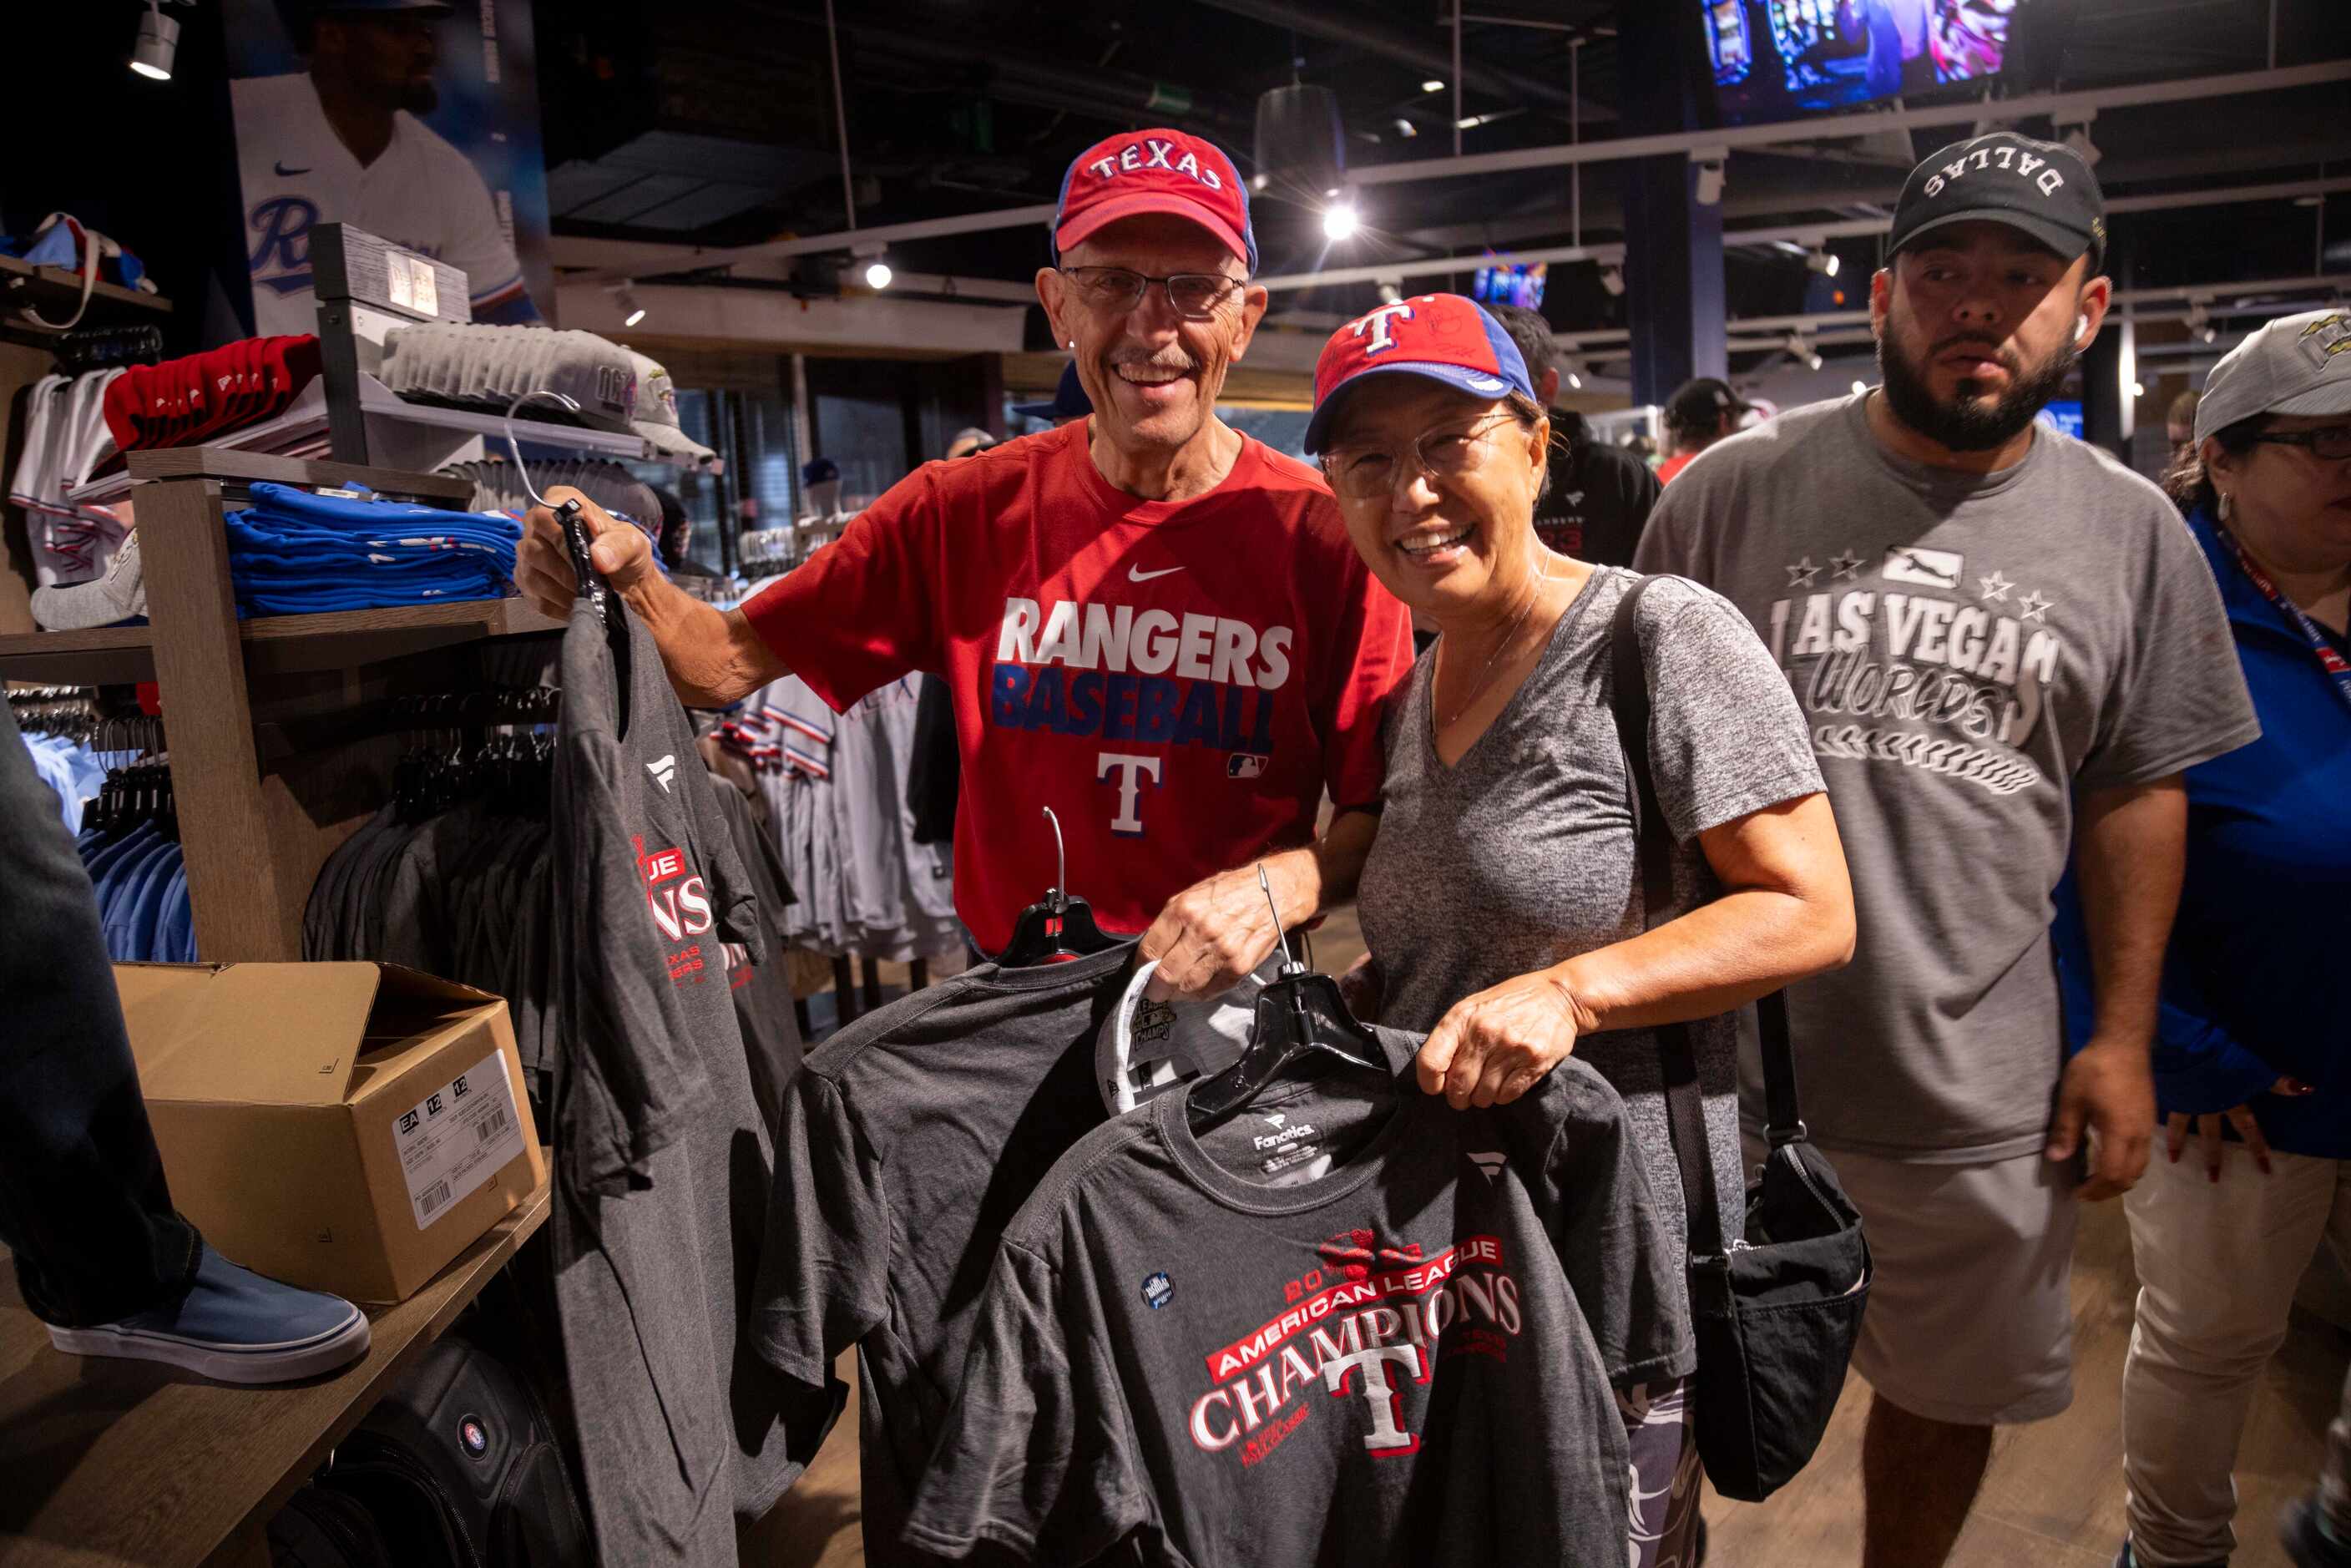 Rangers fans Randy Keadey (left) and wife Yong Hong pose for a photo with American League...